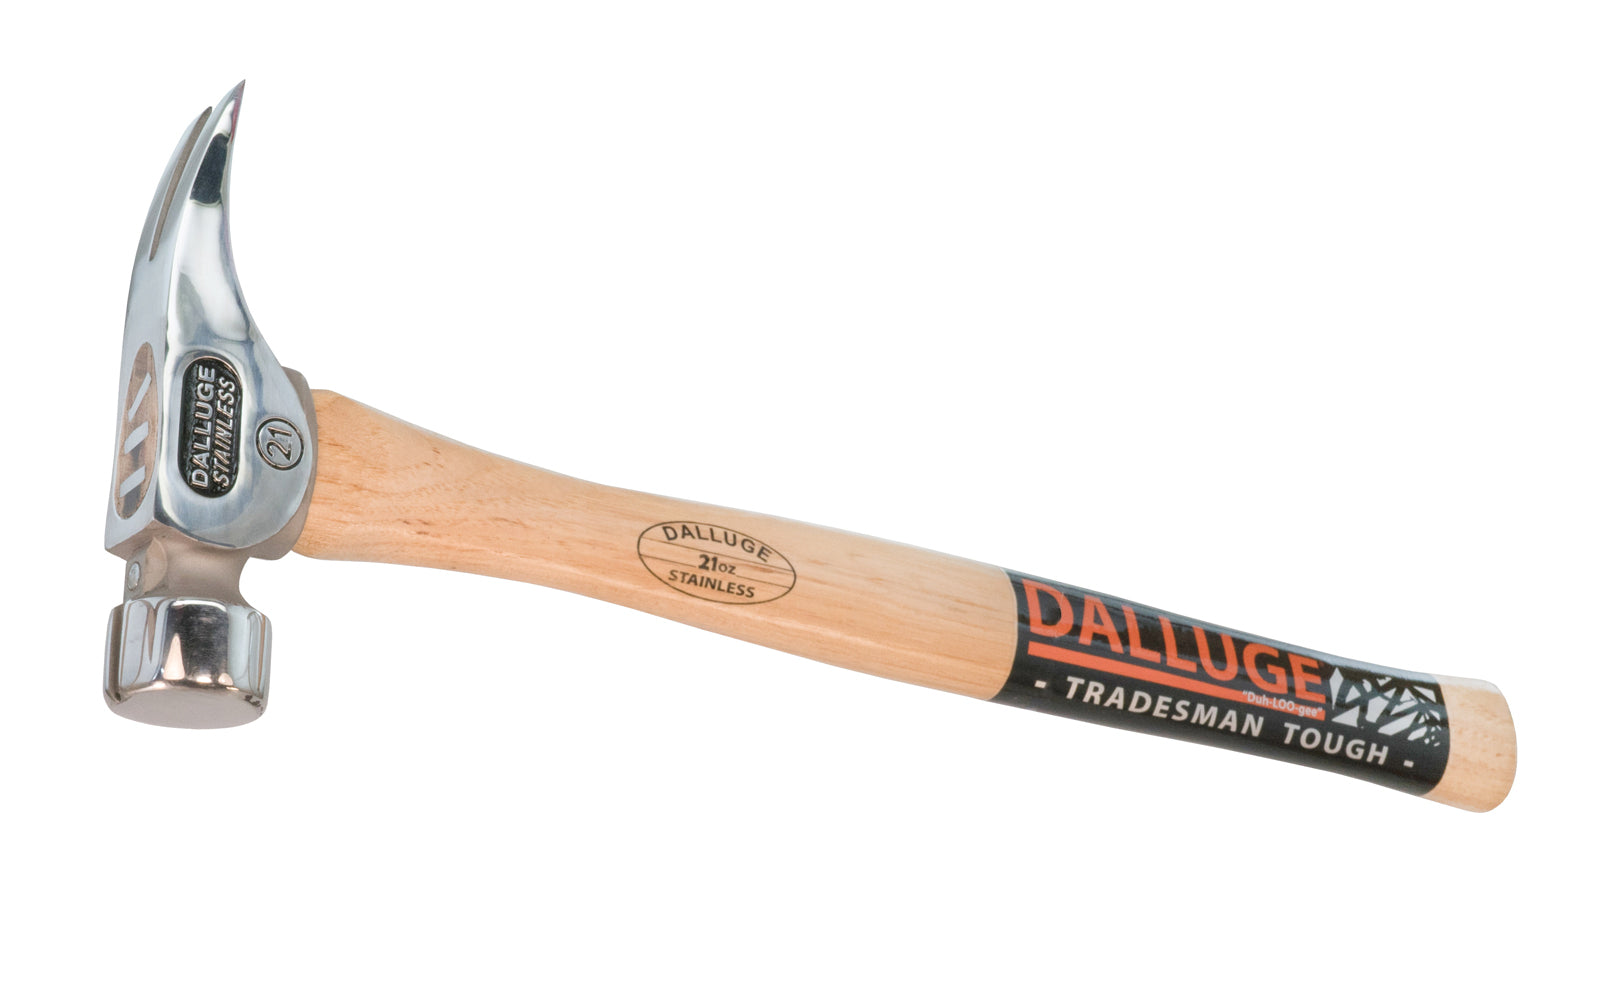 This 21 oz Dalluge Stainless Head Framing Hammer has a smooth face & 